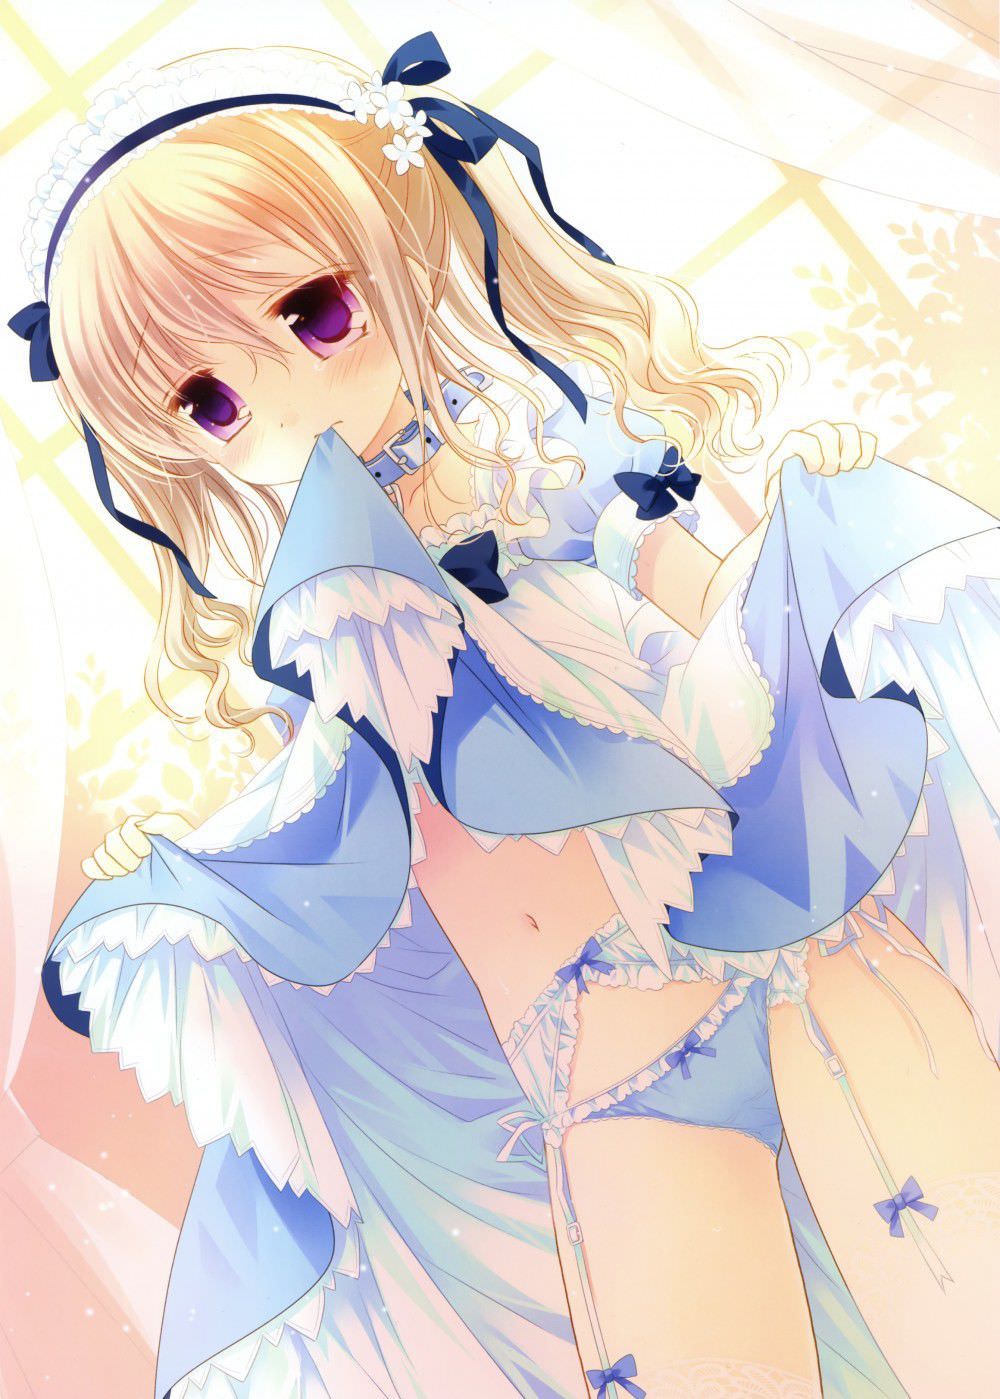 [Taku me up beautiful girl] skirt up and shy look is the best! The image that I want to raise of shame! 1